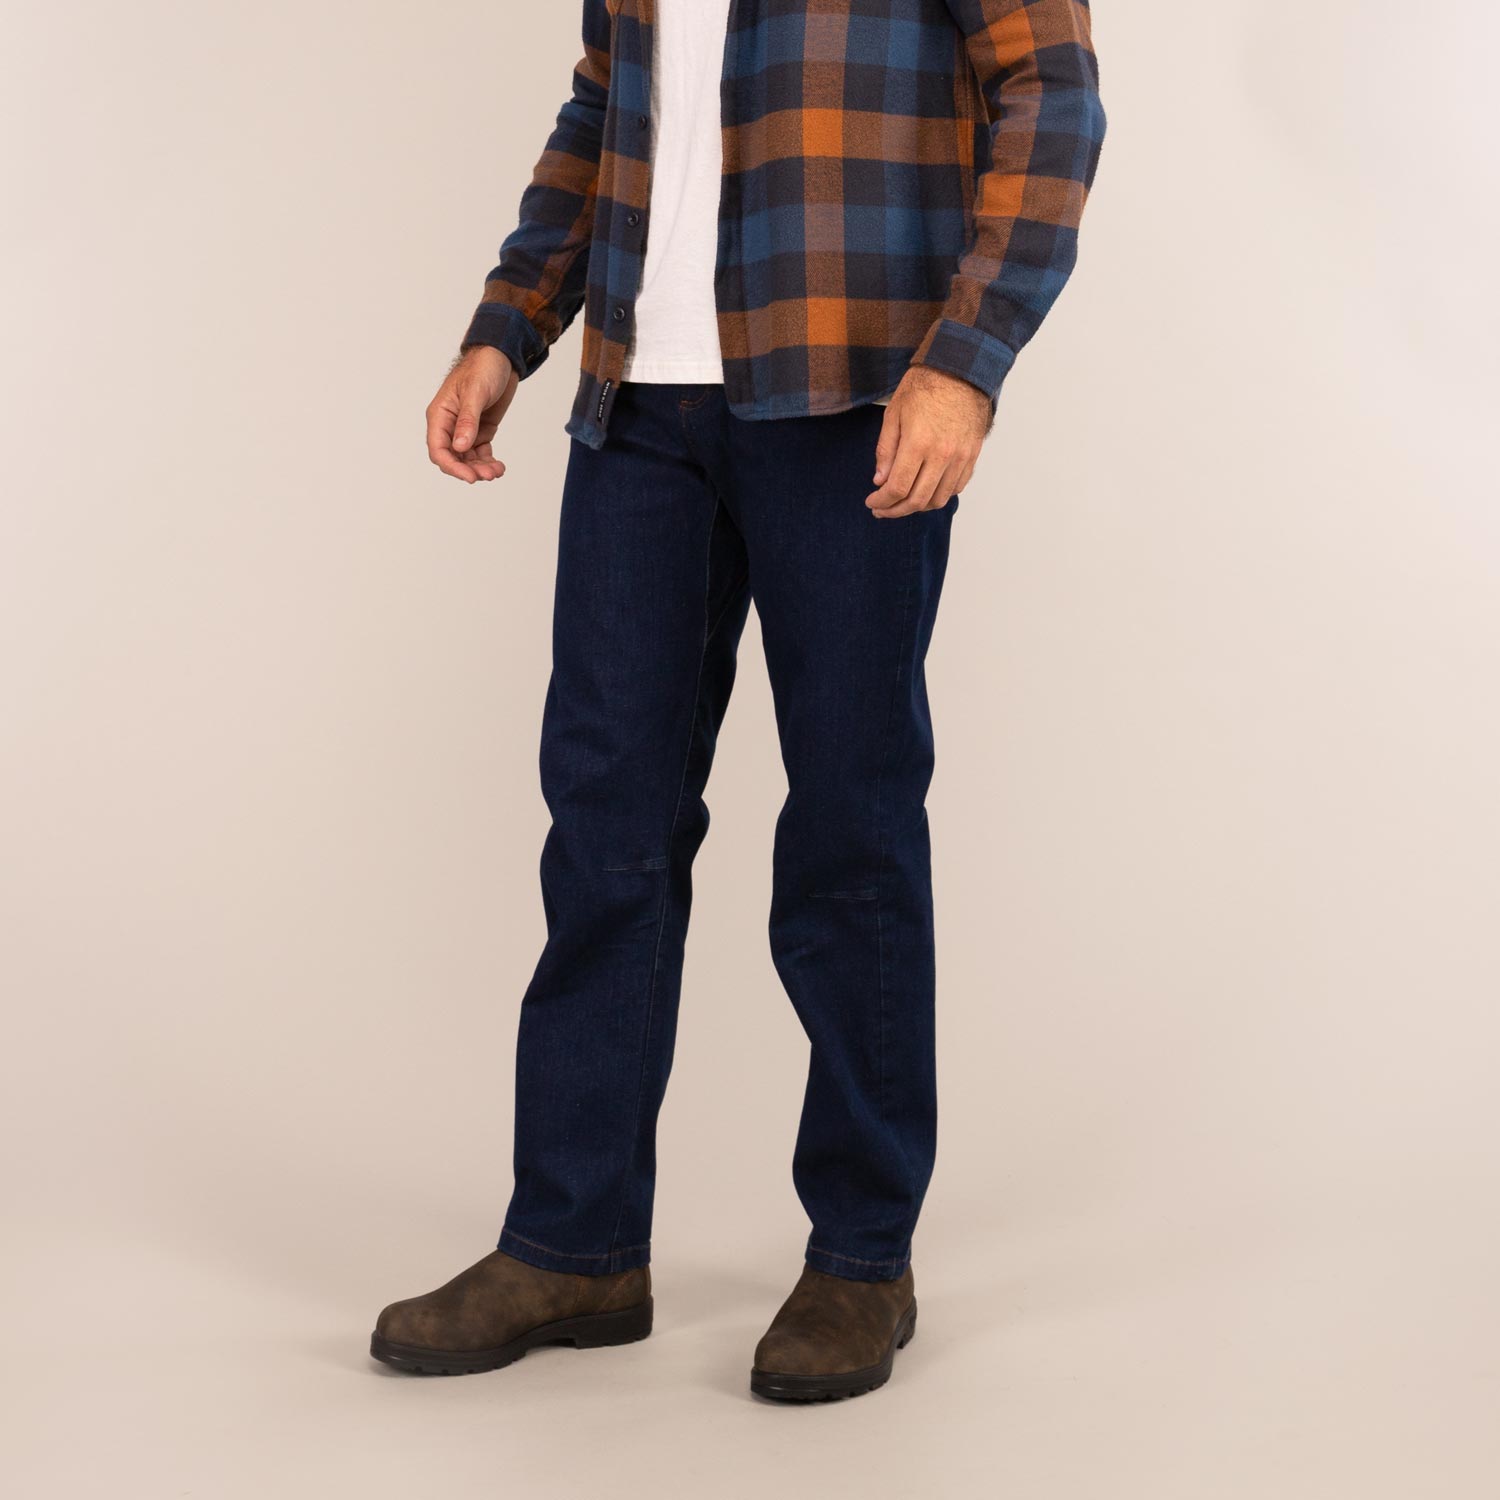 3RD ROCK MARS Eco Jeans - Oliver is 6ft 2" with a 34" waist, 40" hips and wears a 34/LL. M